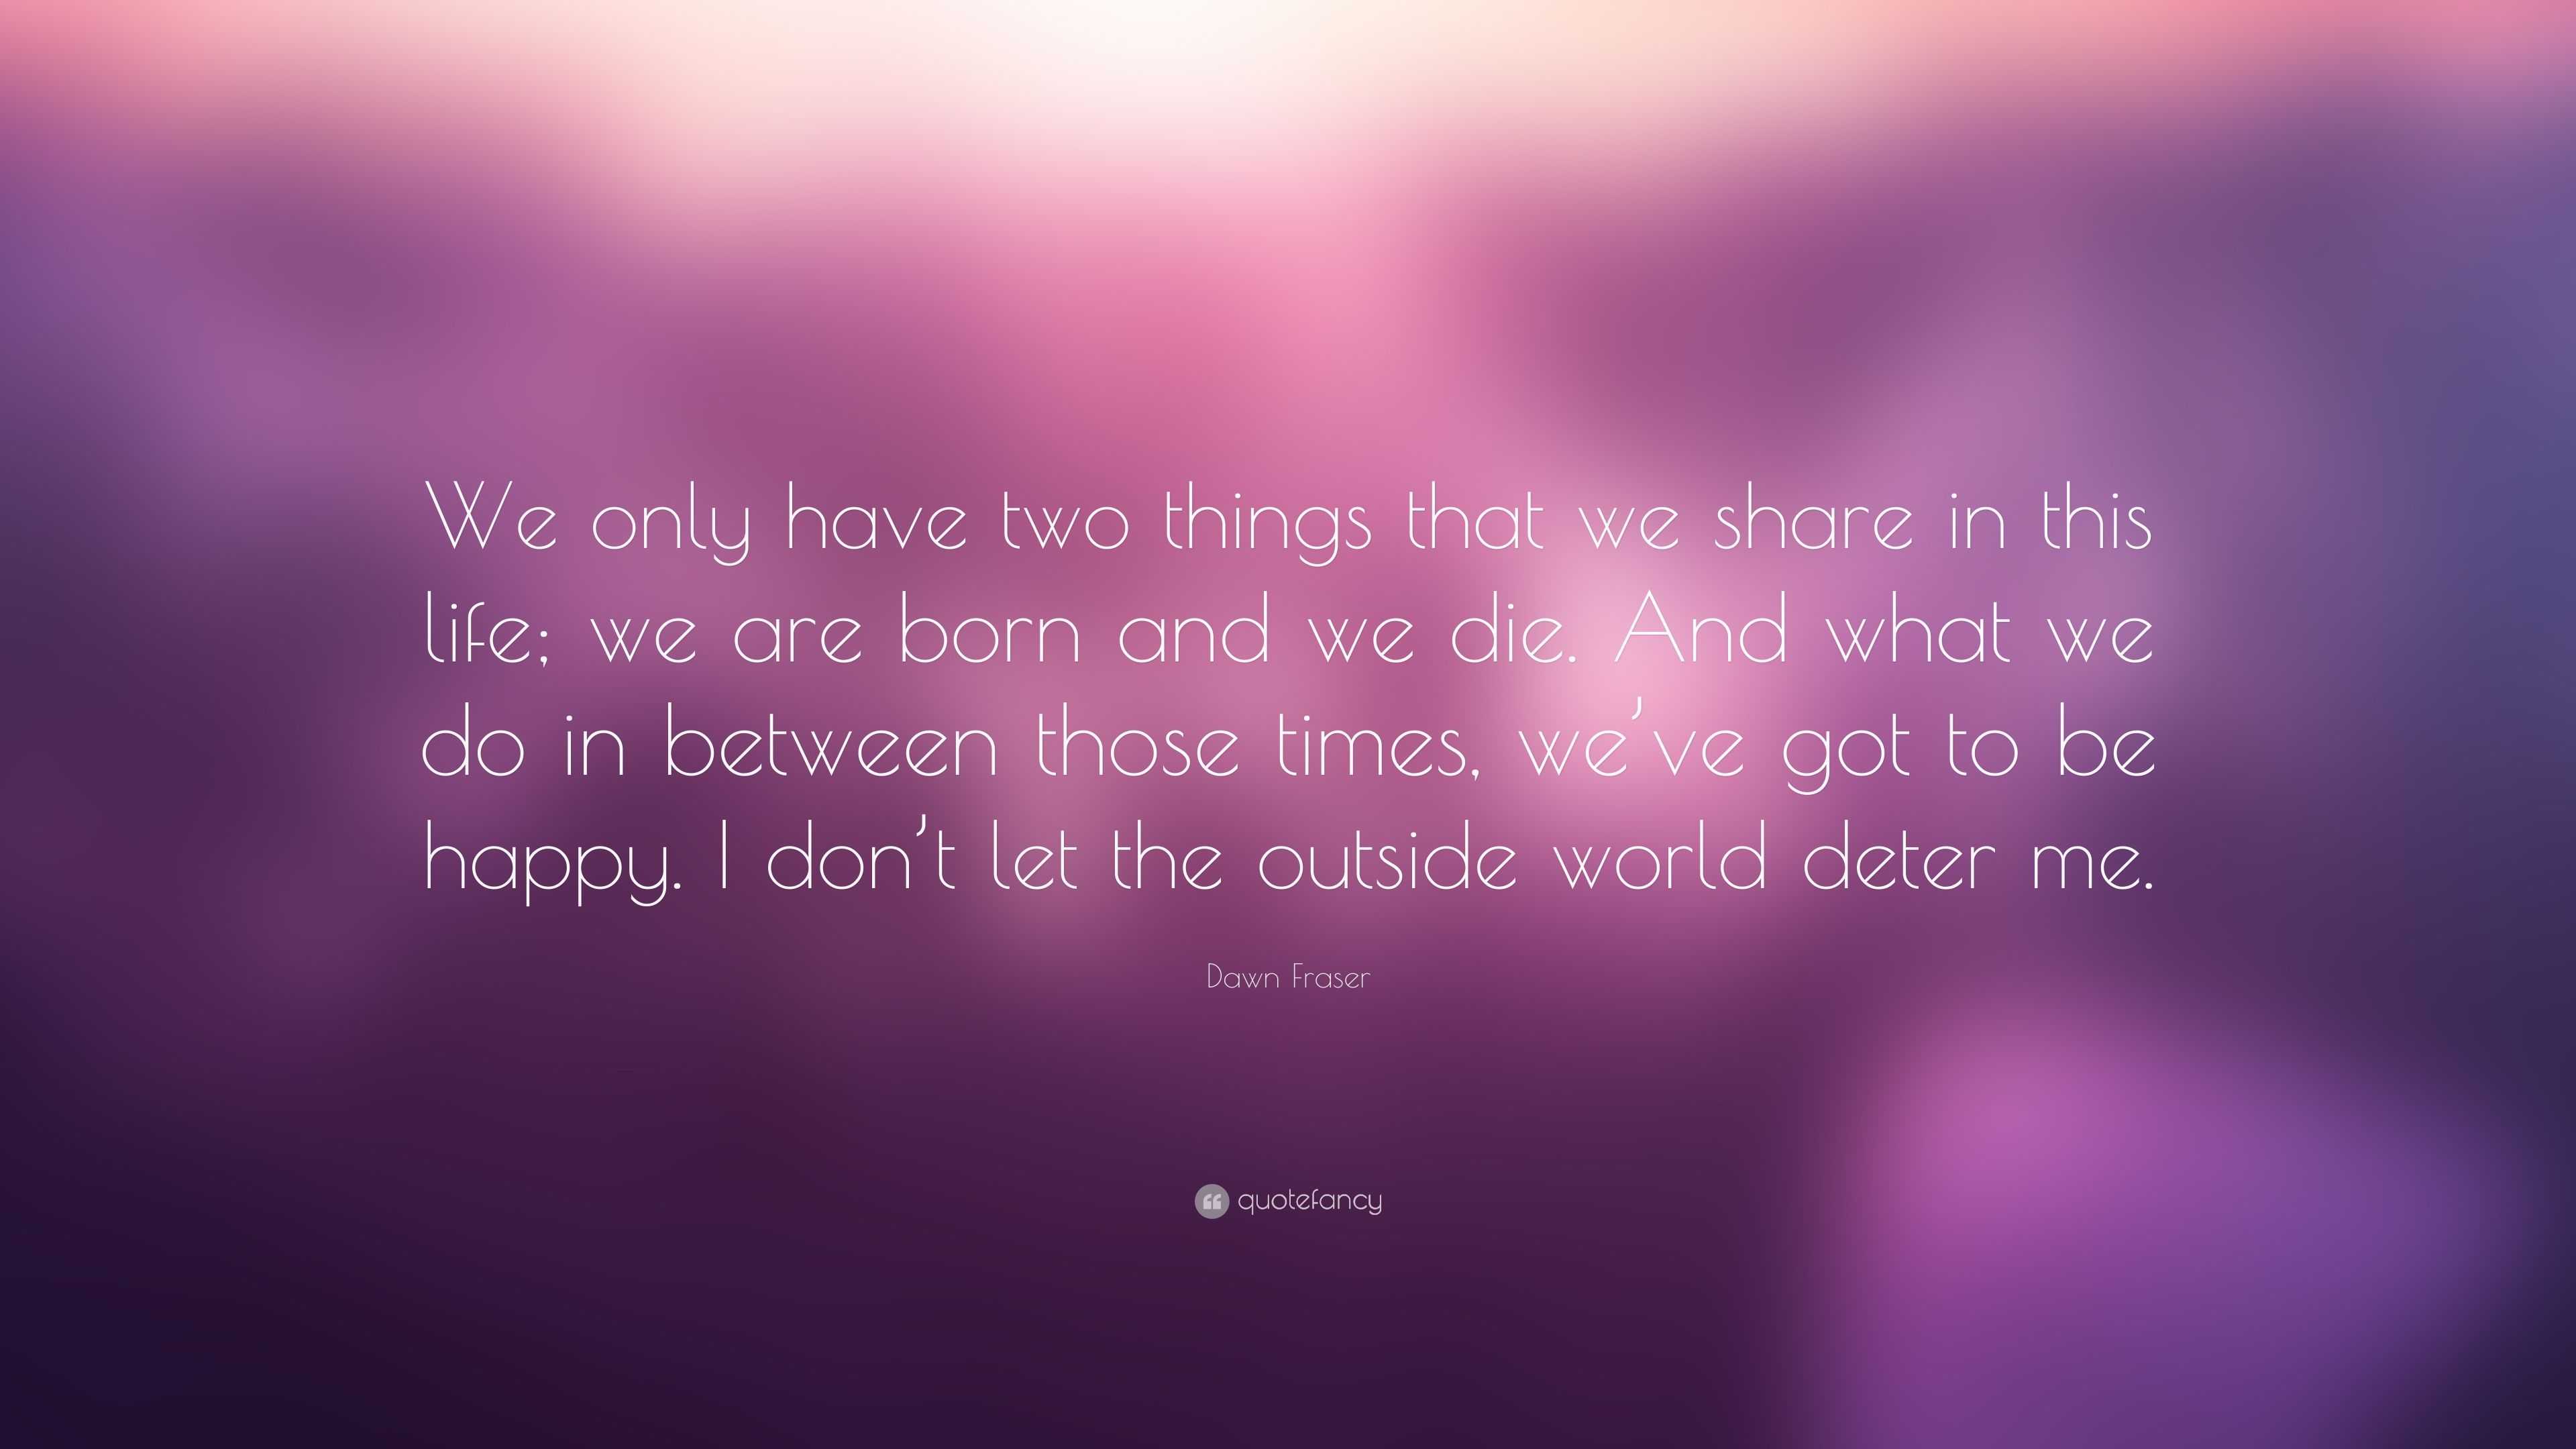 Dawn Fraser Quote: “We only have two things that we share in this life ...